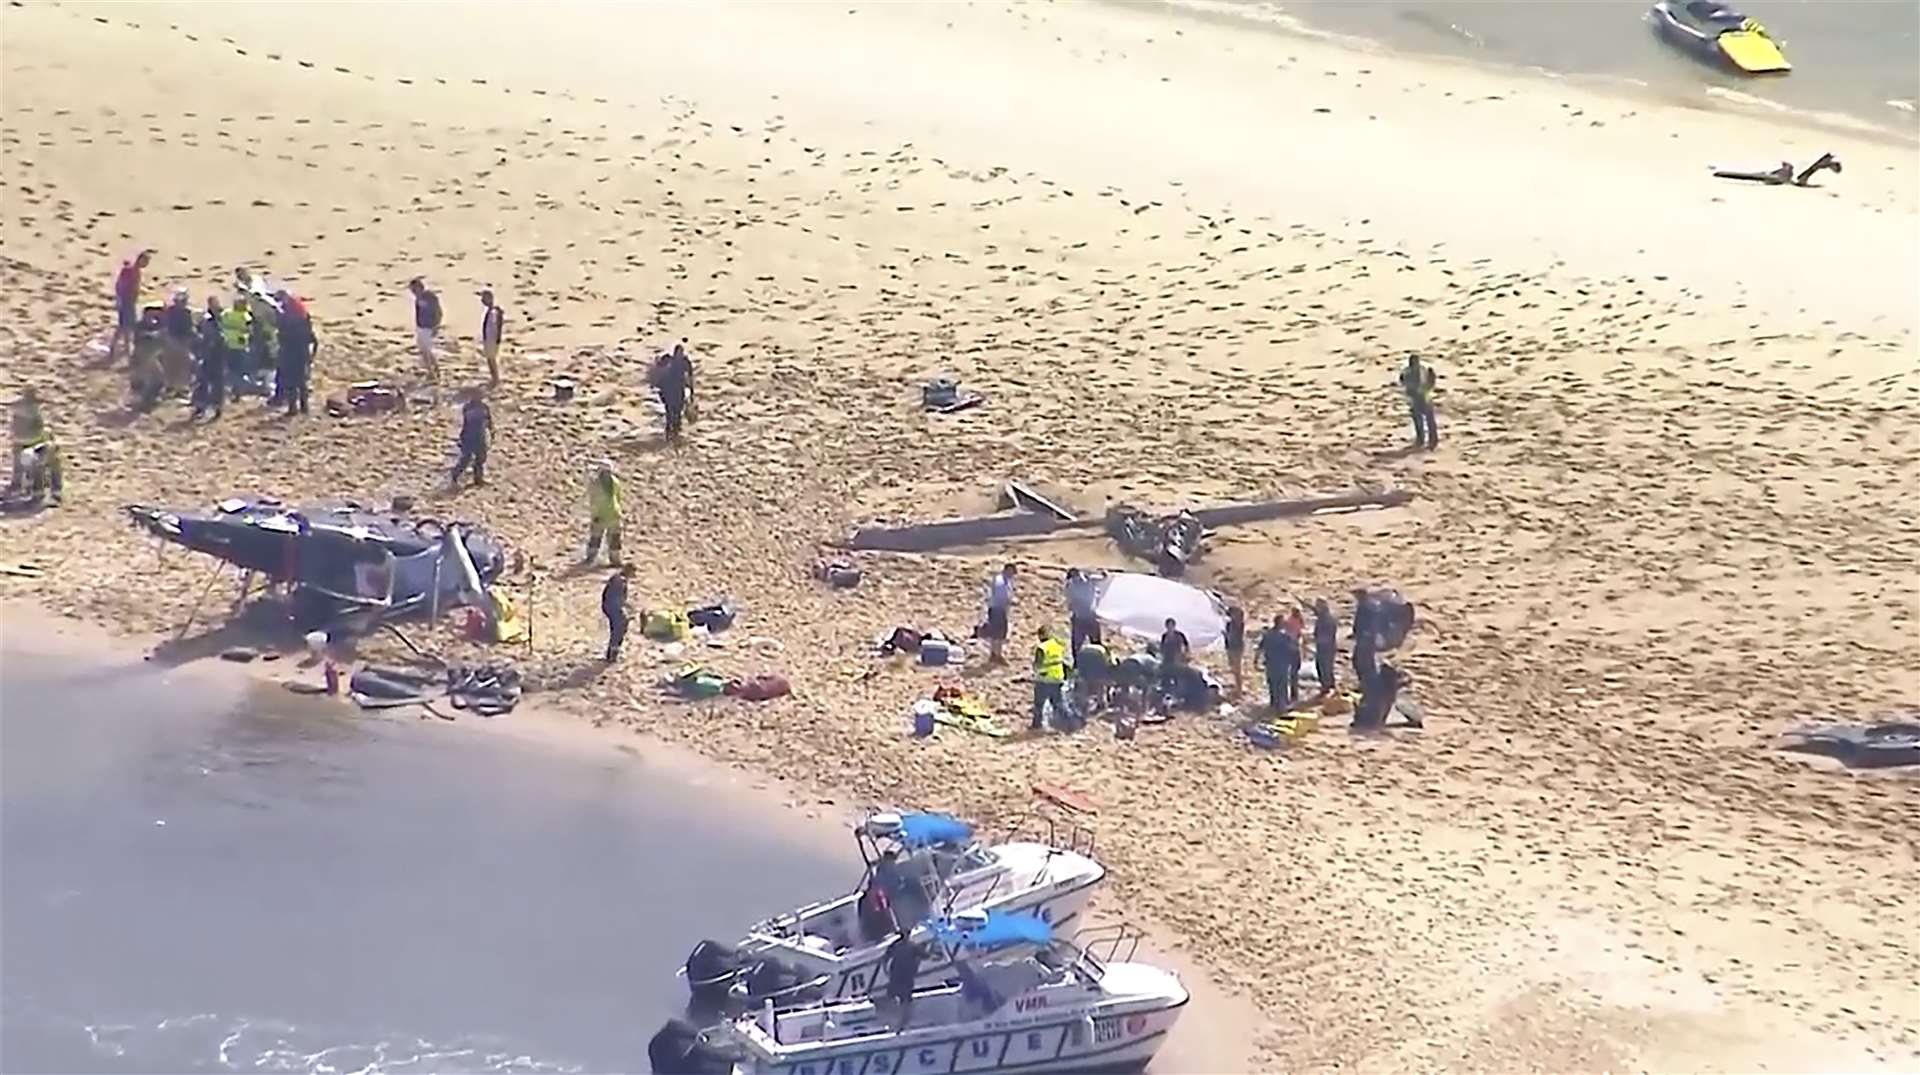 The couple were killed in the crash on Australia’s Gold Coast (CH9/AP)